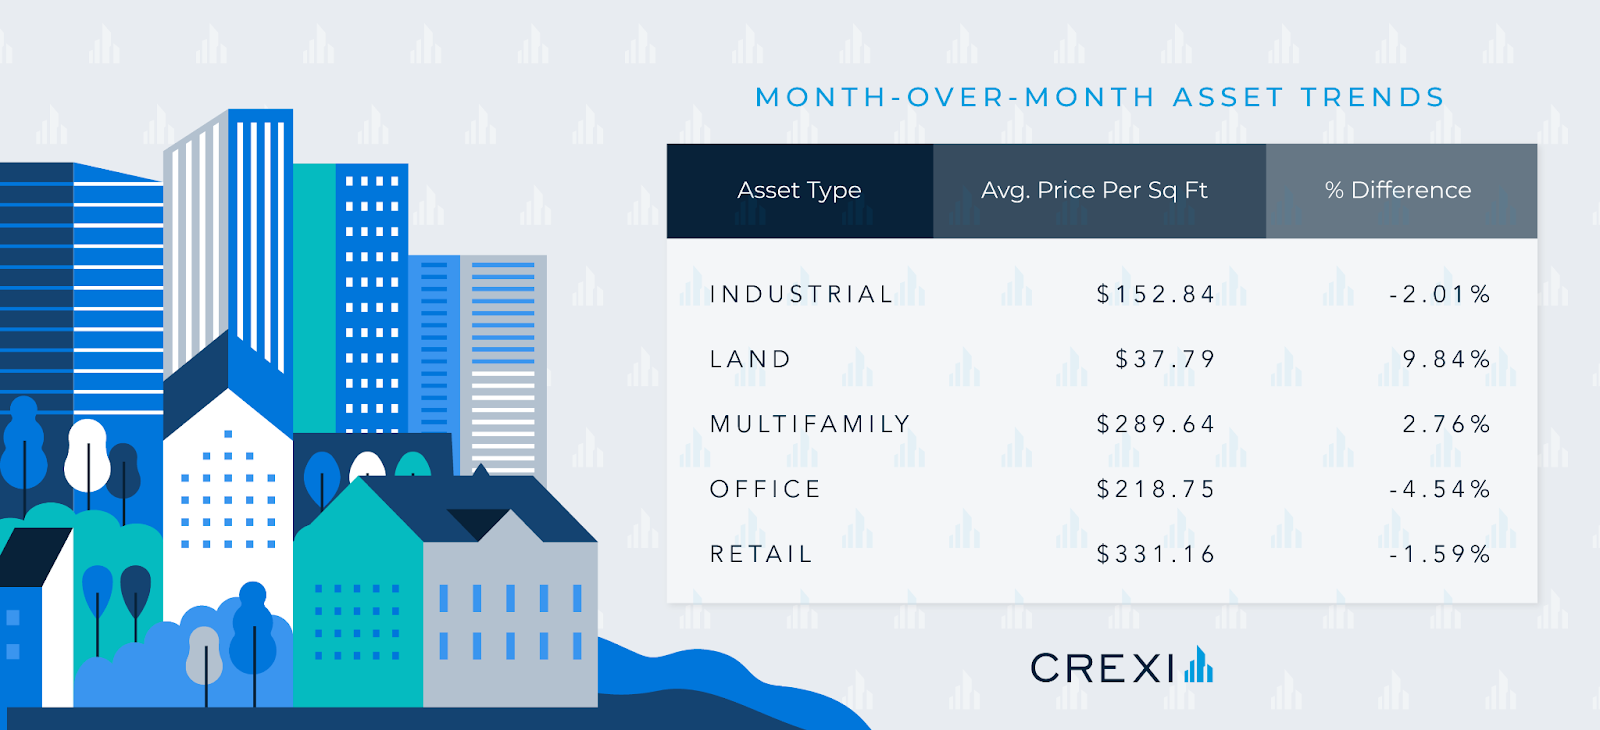 Average Asking Price per Square Foot and Changes Month-over-Month